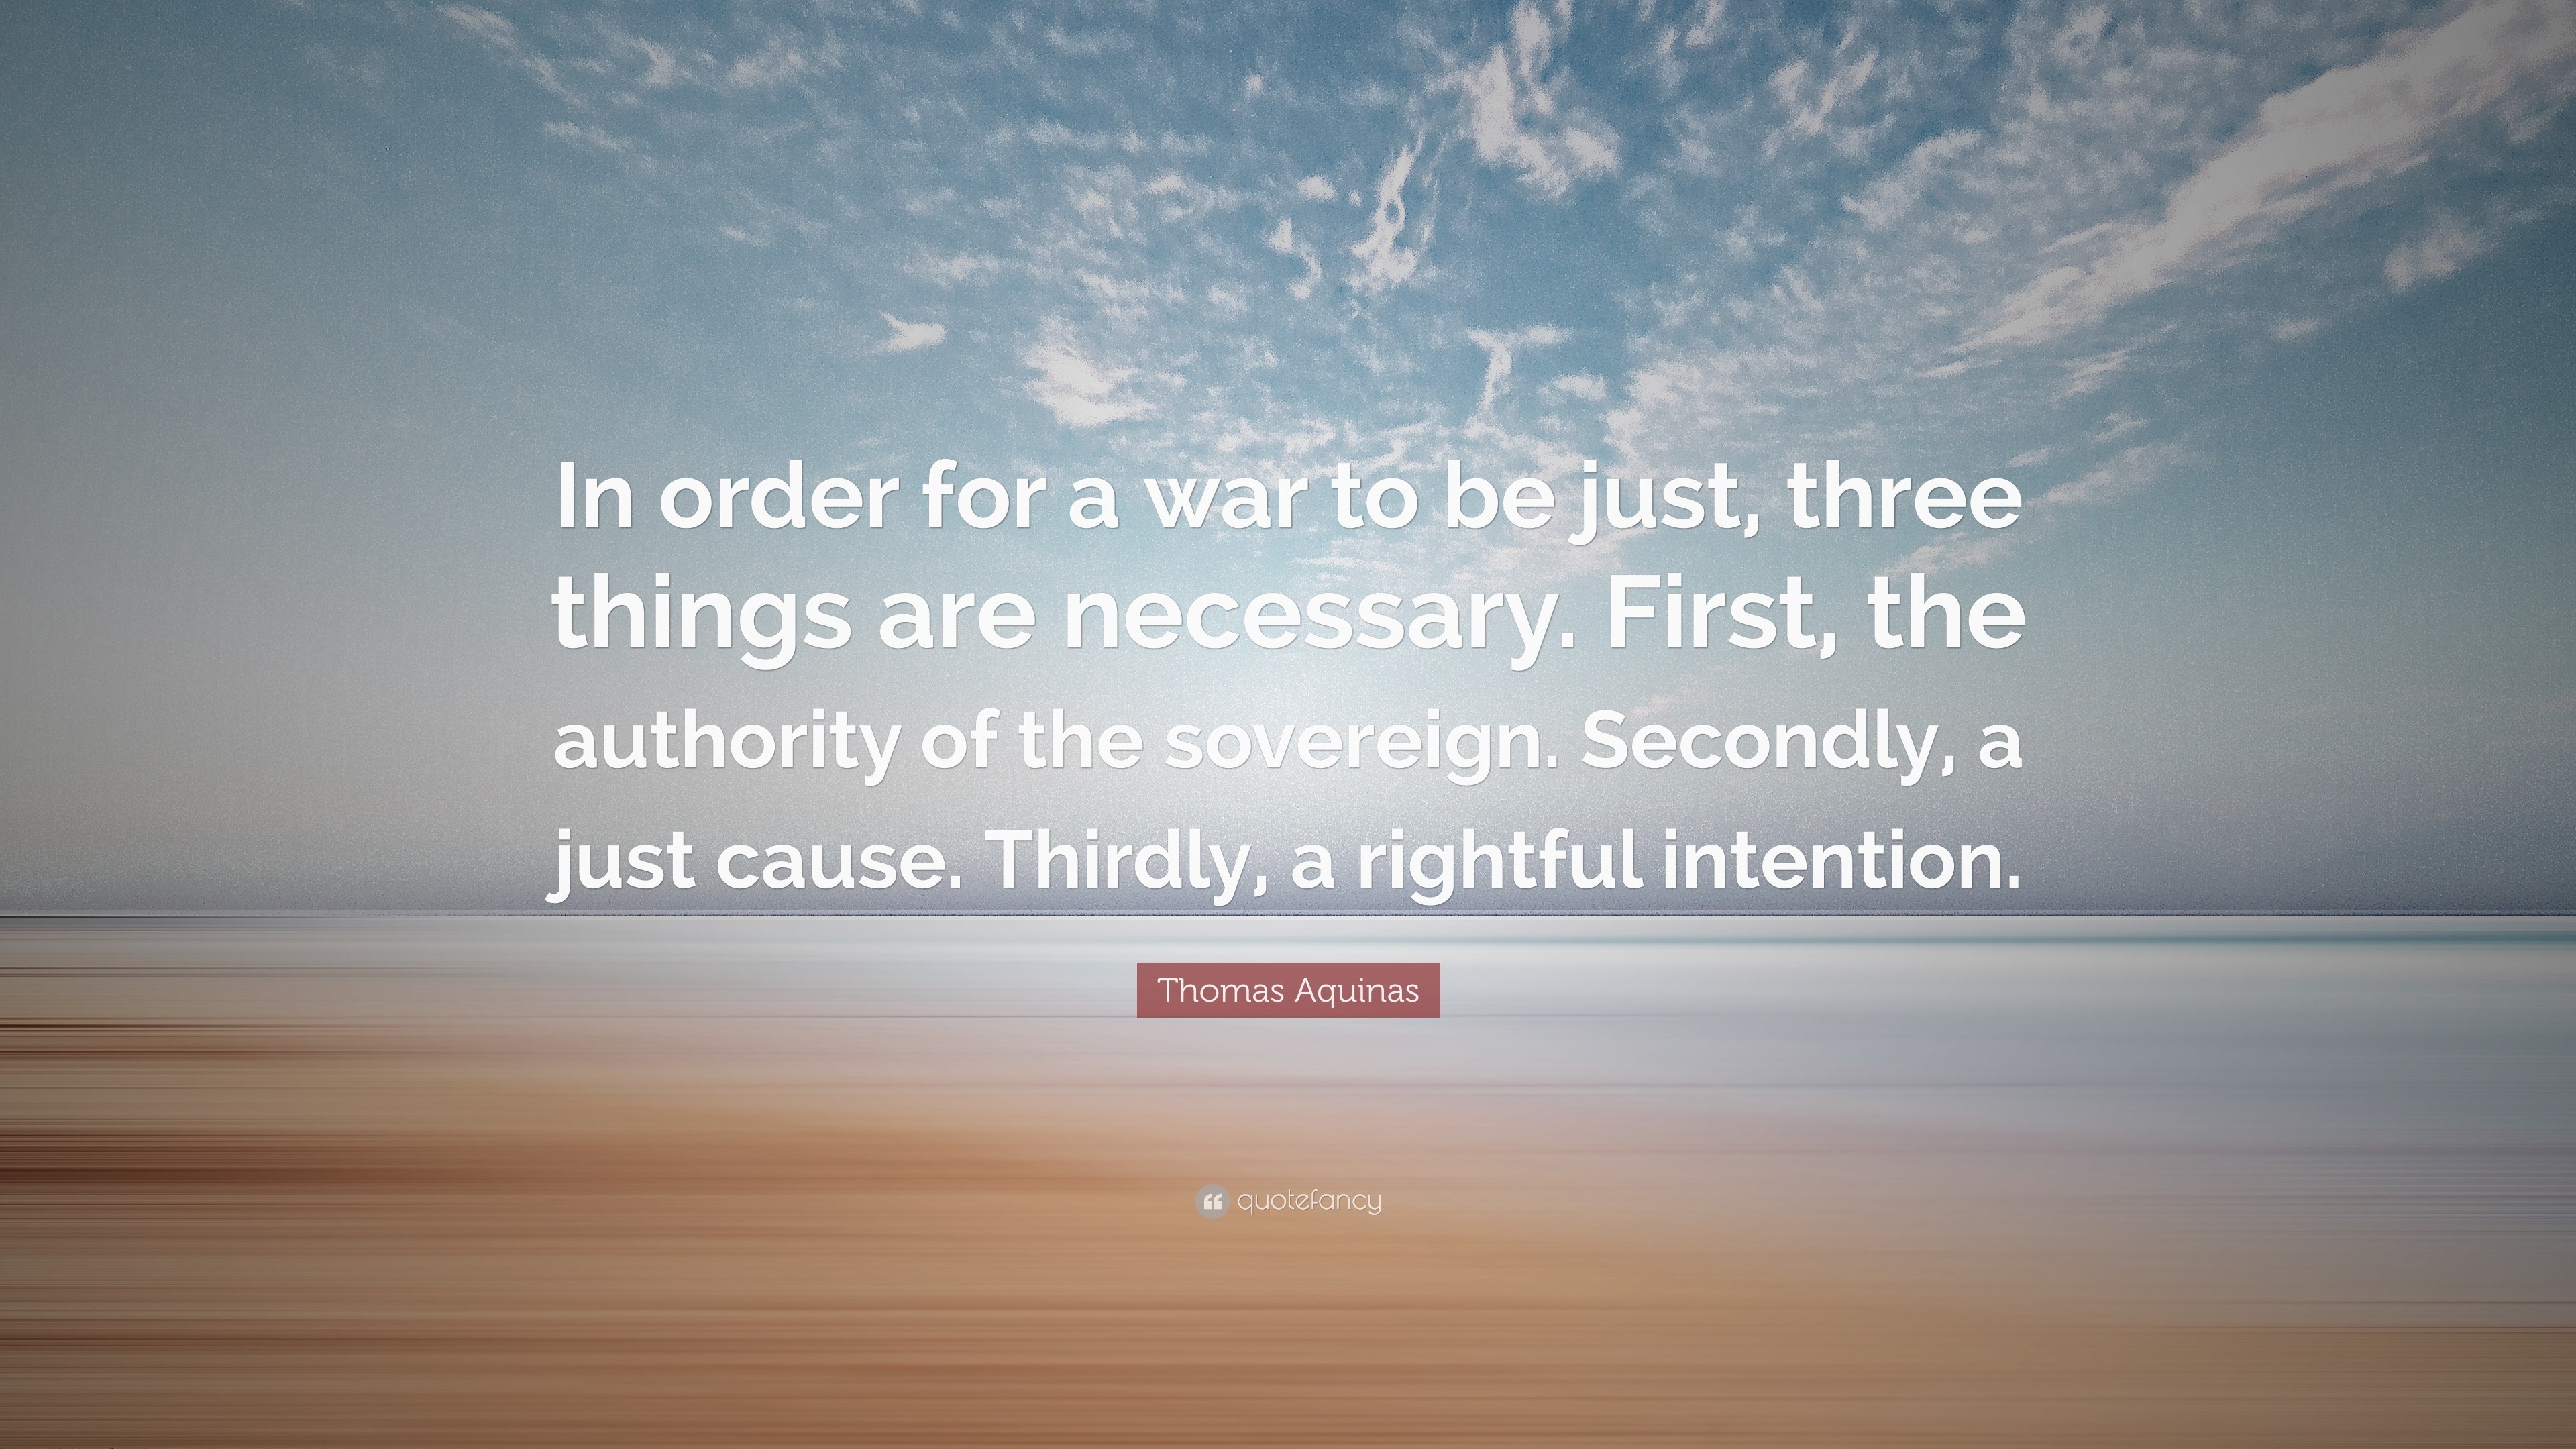 1921690 Thomas Aquinas Quote In order for a war to be just three things